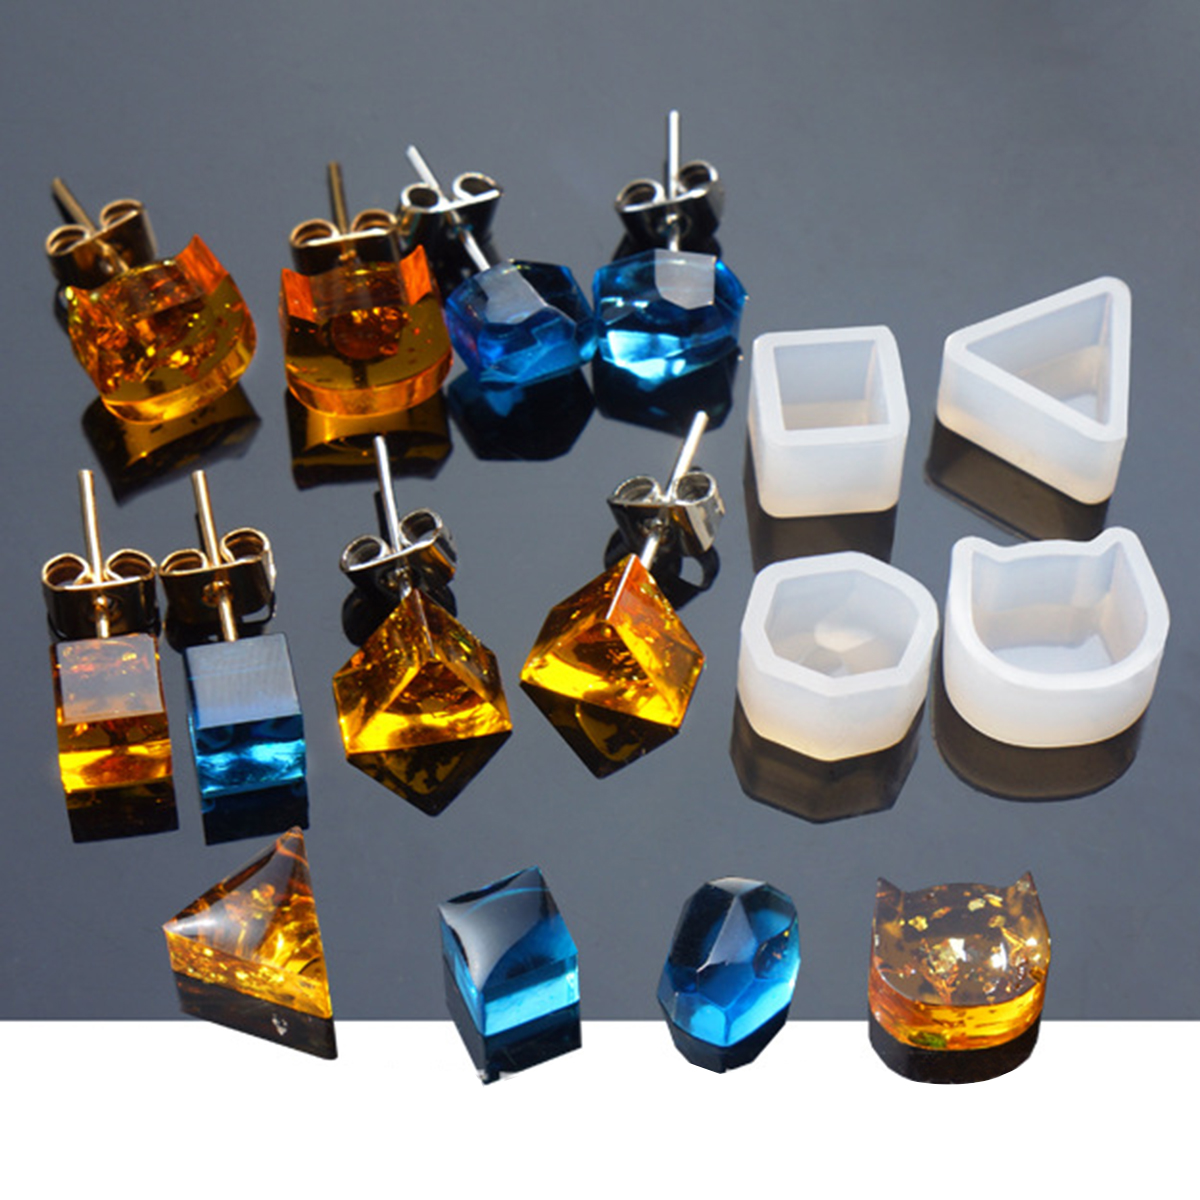 Picture of Silicone Resin Mold For Jewelry Making Square White 7mm( 2/8") x 7mm( 2/8"), 5 PCs